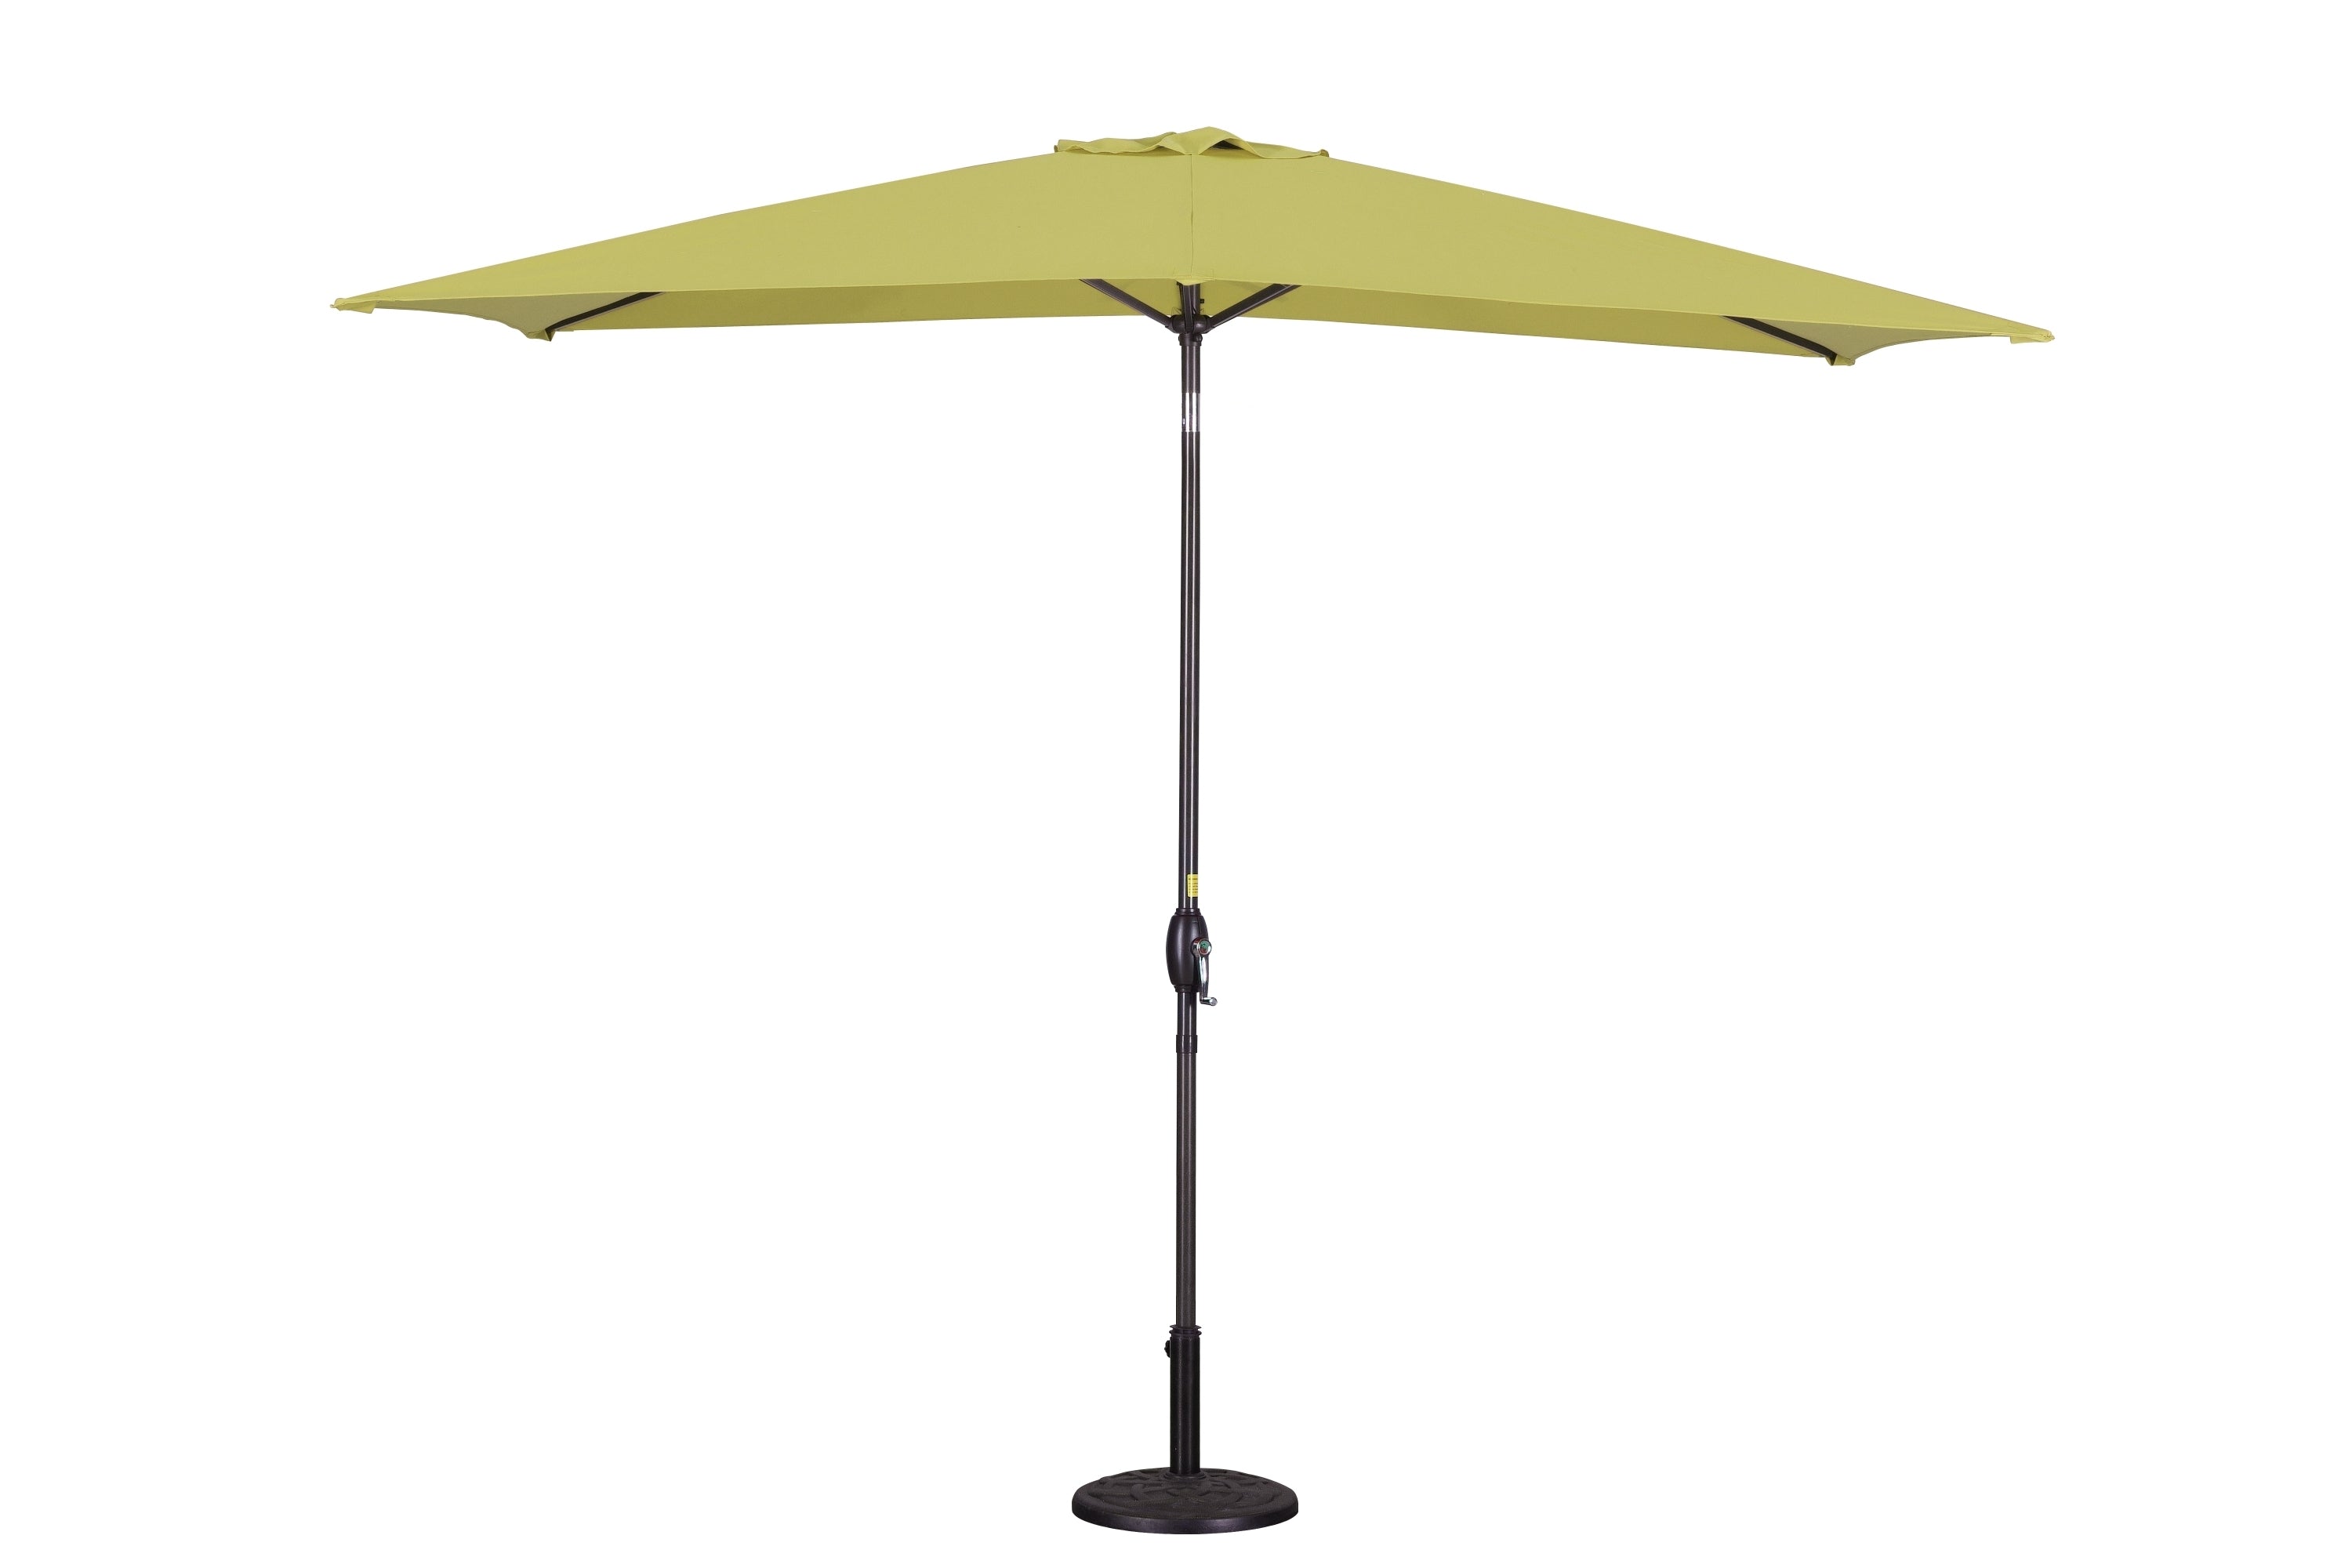 Rectangular-Patio-Umbrella-6.5-ft.-x-10-ft.-with-Tilt,-Crank-and-6-Sturdy-Ribs-for-Deck,-Lawn,-Pool-in-LIME-GREEN-Furniture/outdoor/Umbrellas-&-Sunshades